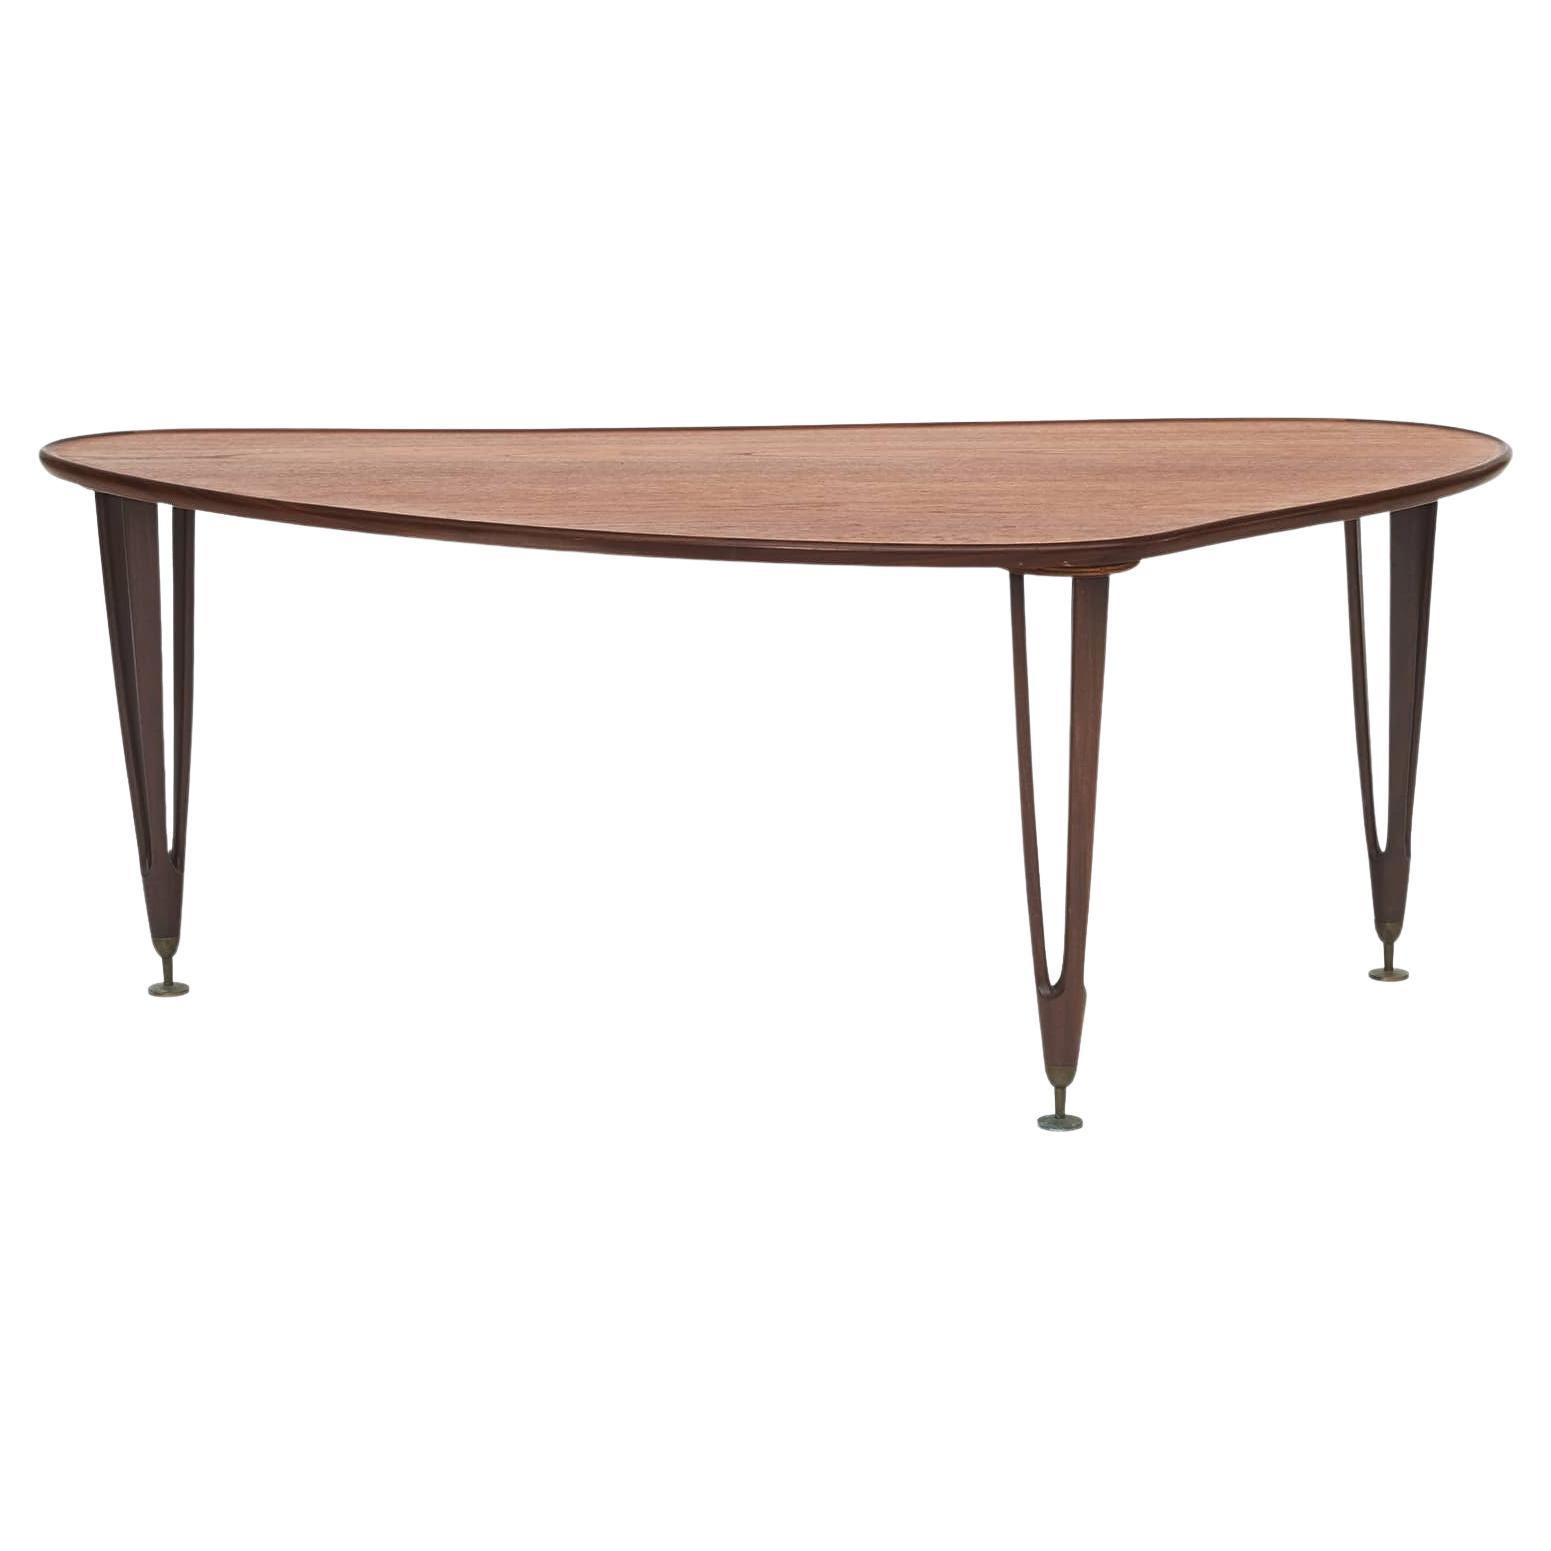 Danish Mid-Century Organically Shaped Teak Coffee Table by BC Møbler For Sale at